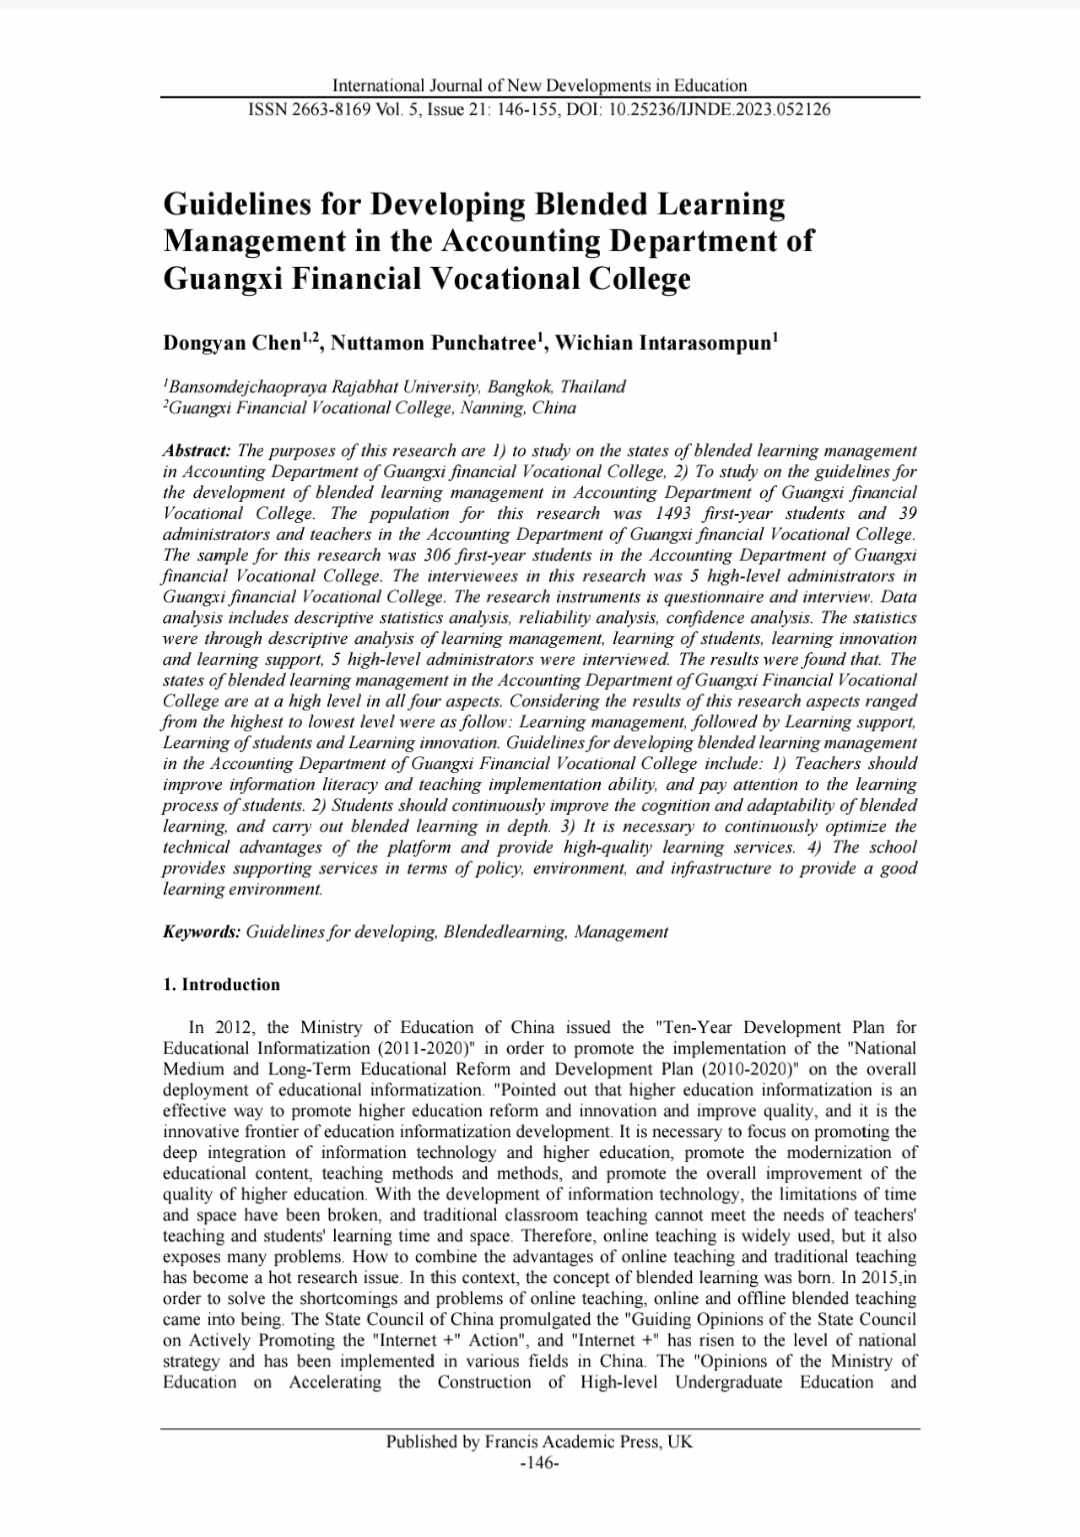 Guidelines for Developing Blended Learning Management in the Accounting Department of Guangxi Financial Vocational College